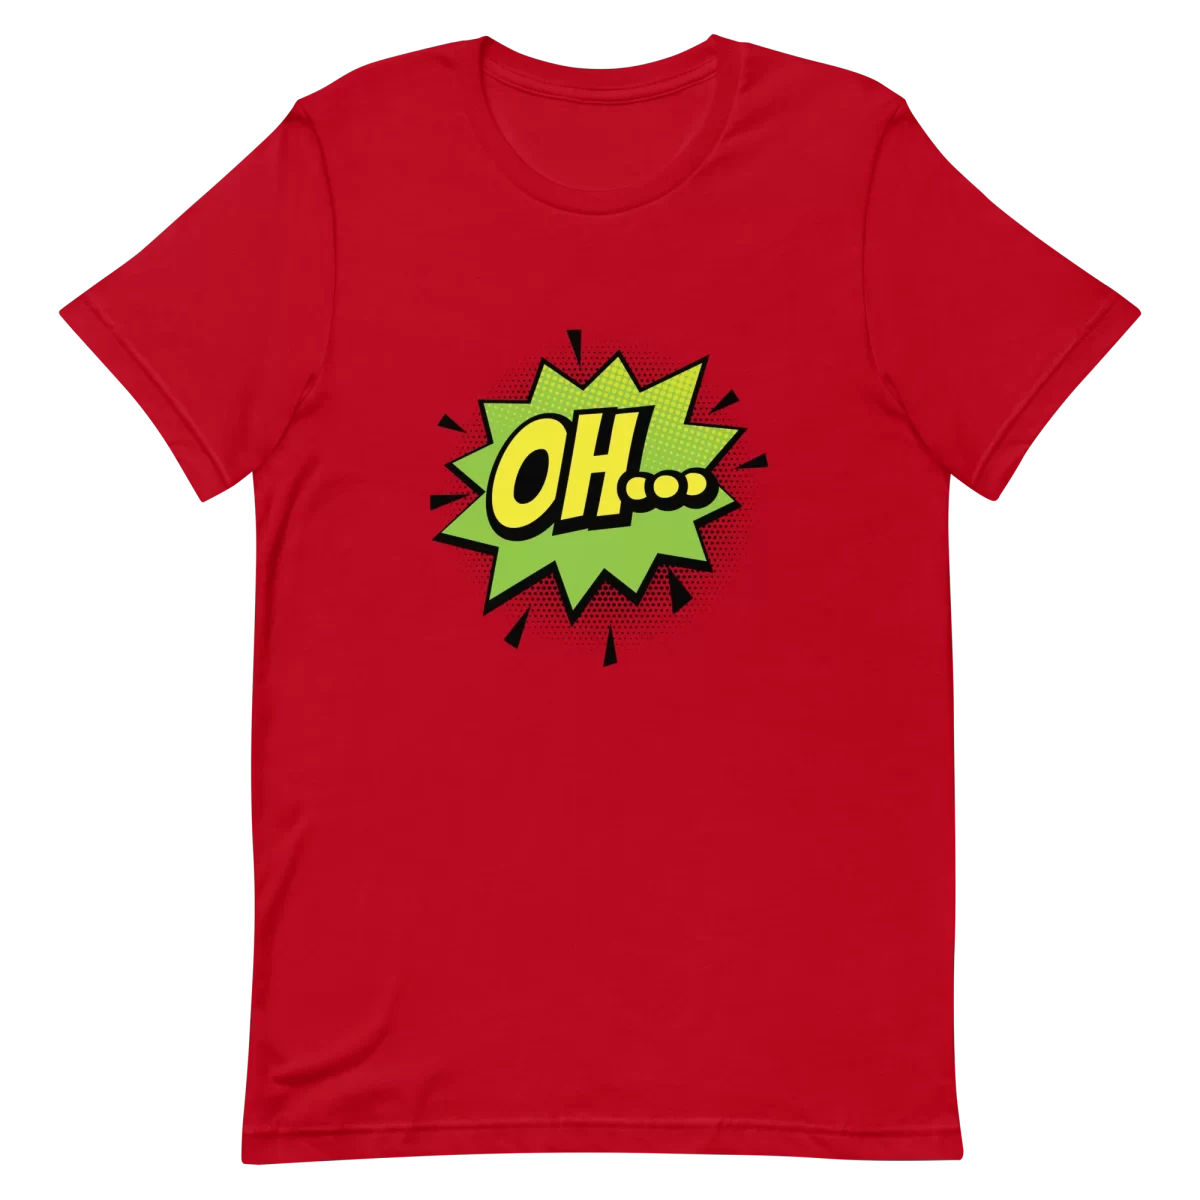 Unisex T-Shirt - OH... - Red